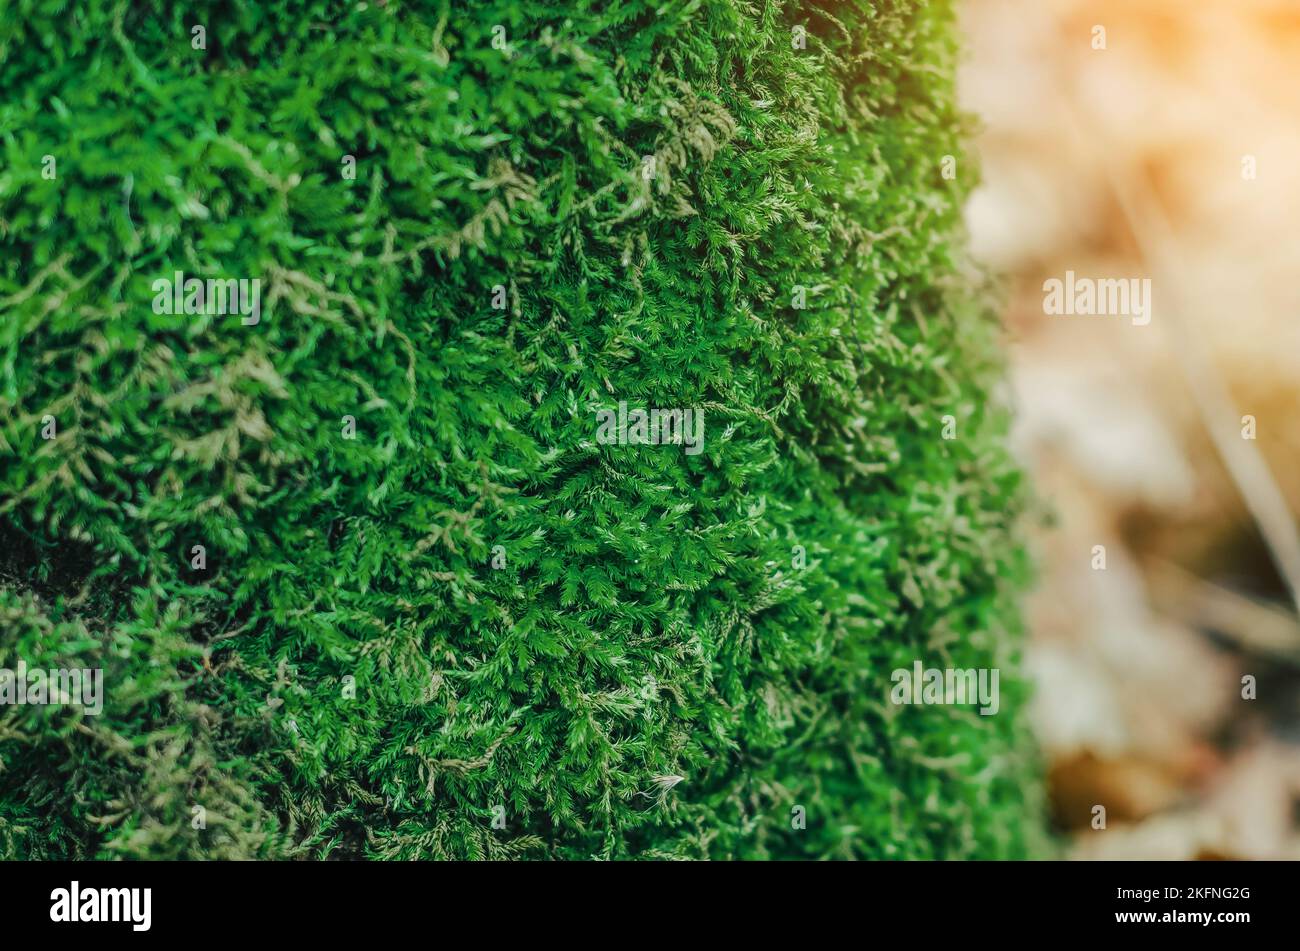 Green moss. Modern eco friendly decor made of colored stabilized moss. Natural background for design and text. Stock Photo